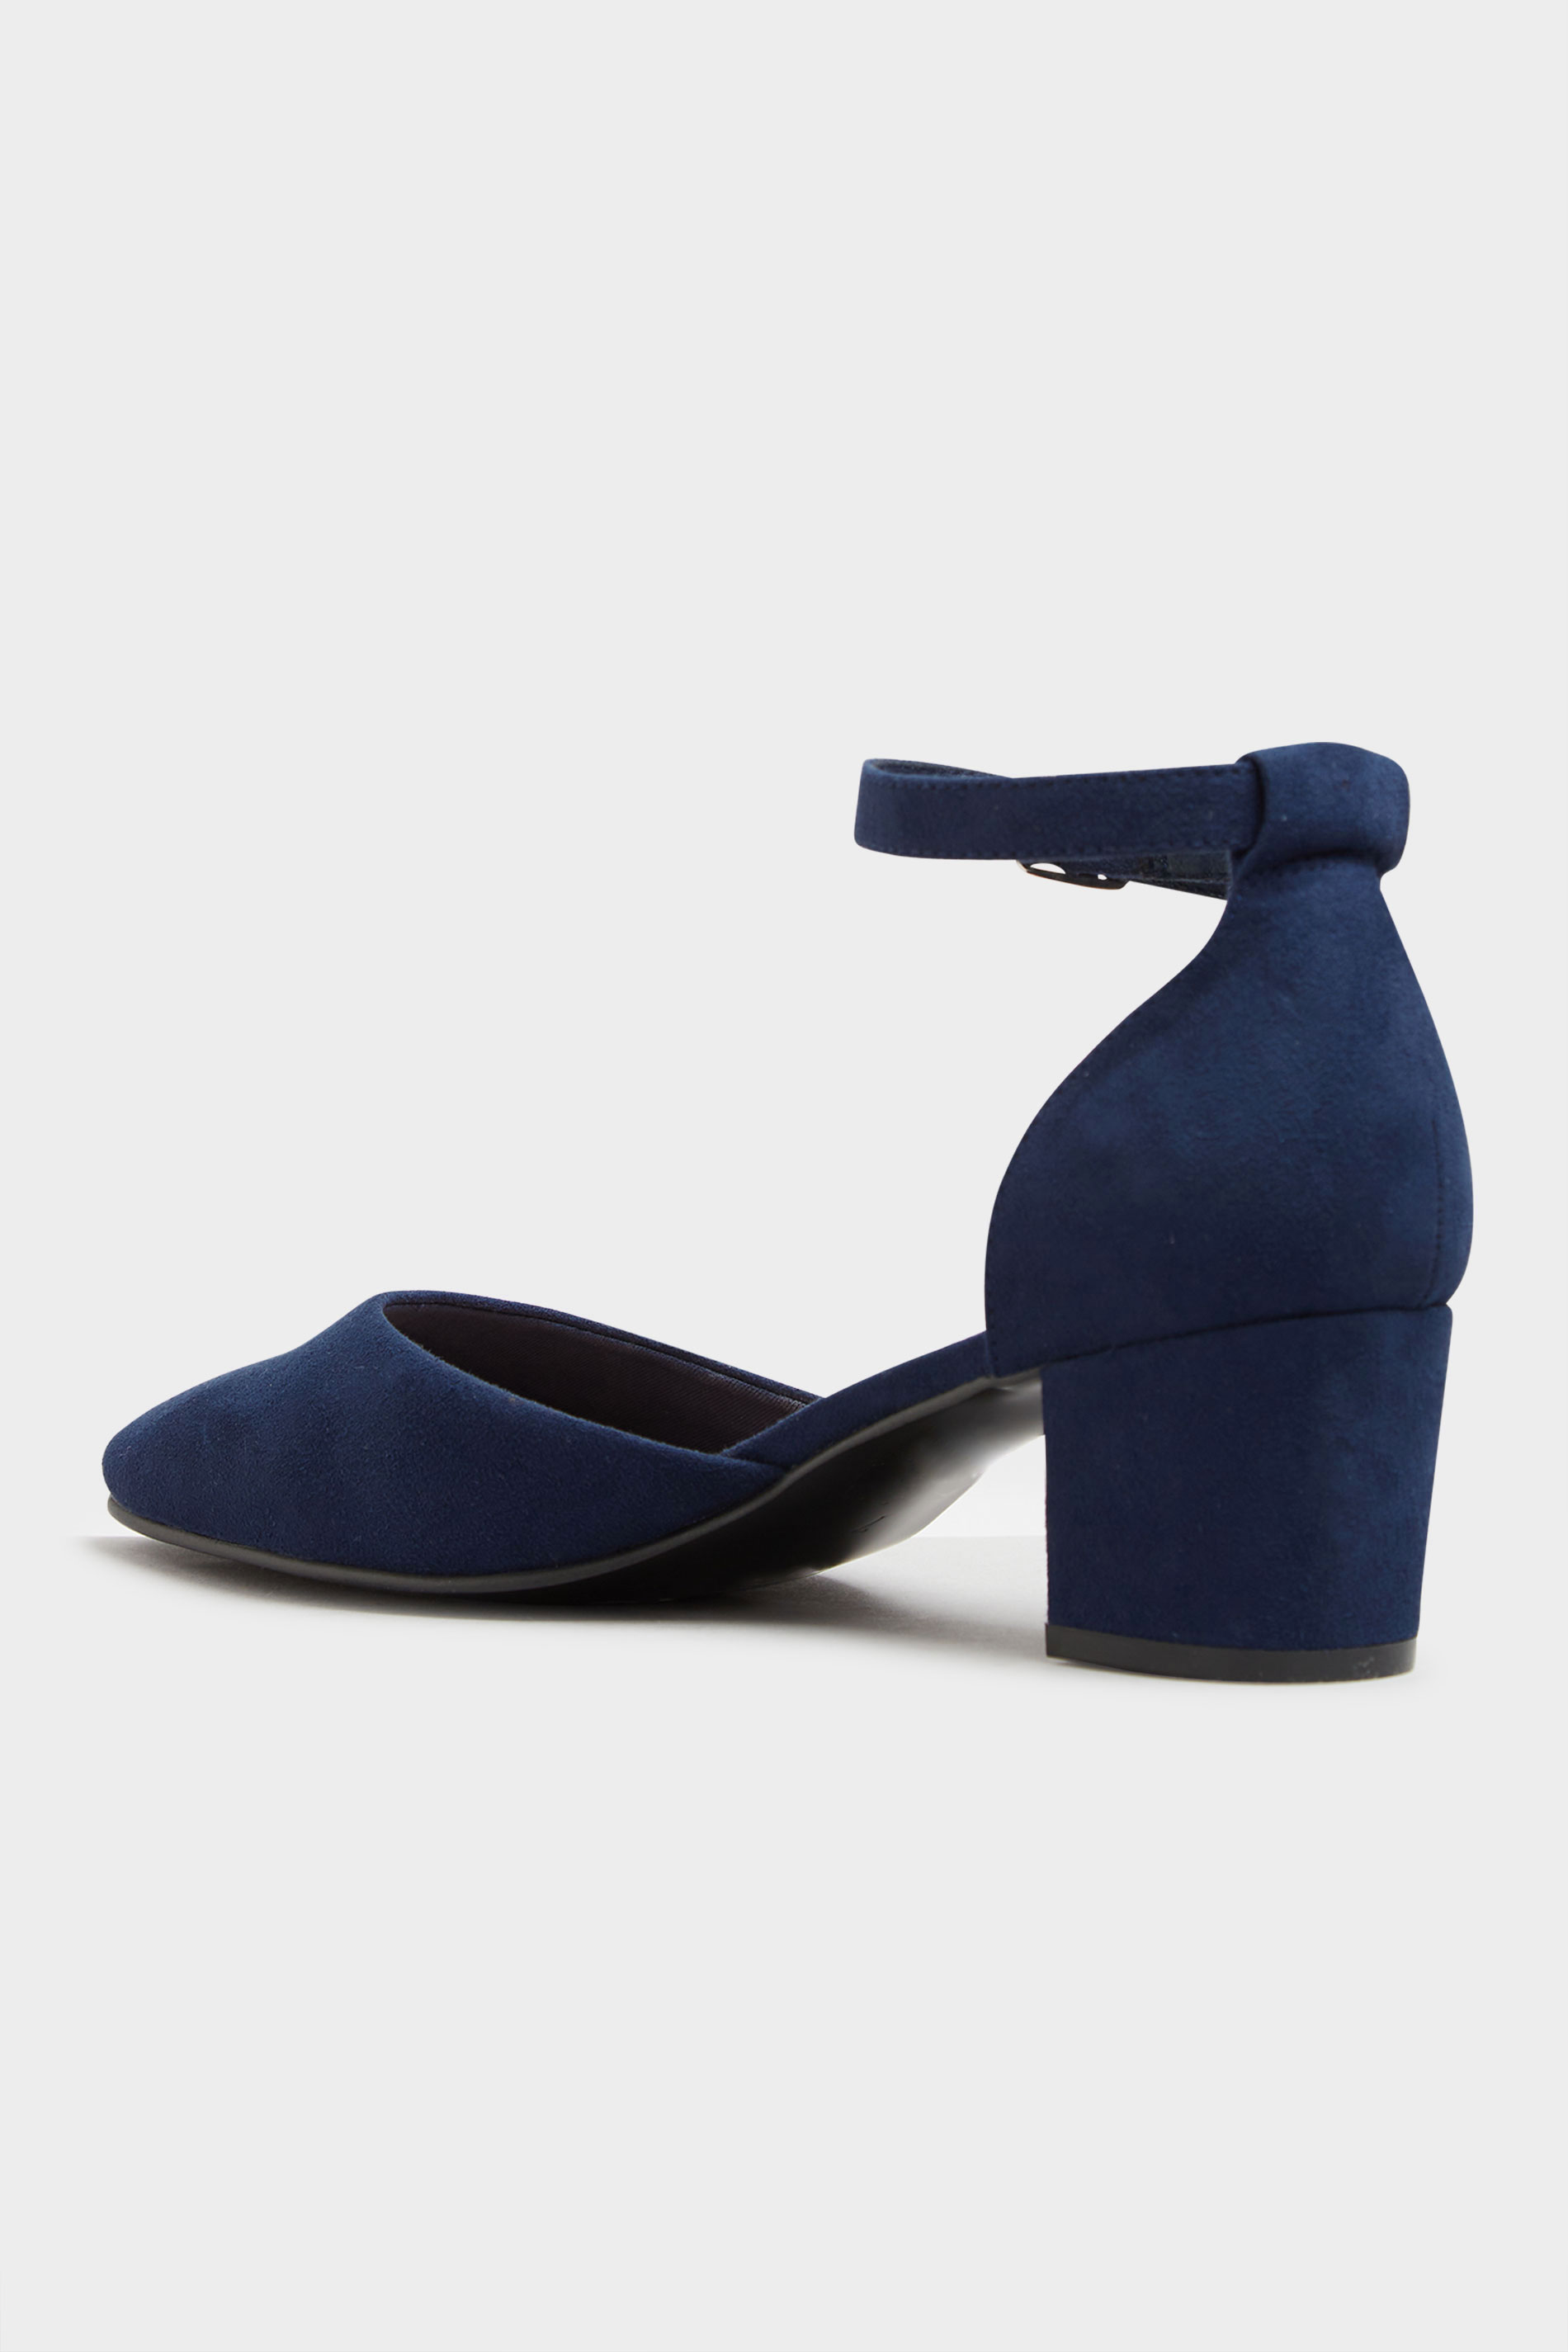 Navy blue block sandals from Dionne - KeeShoes